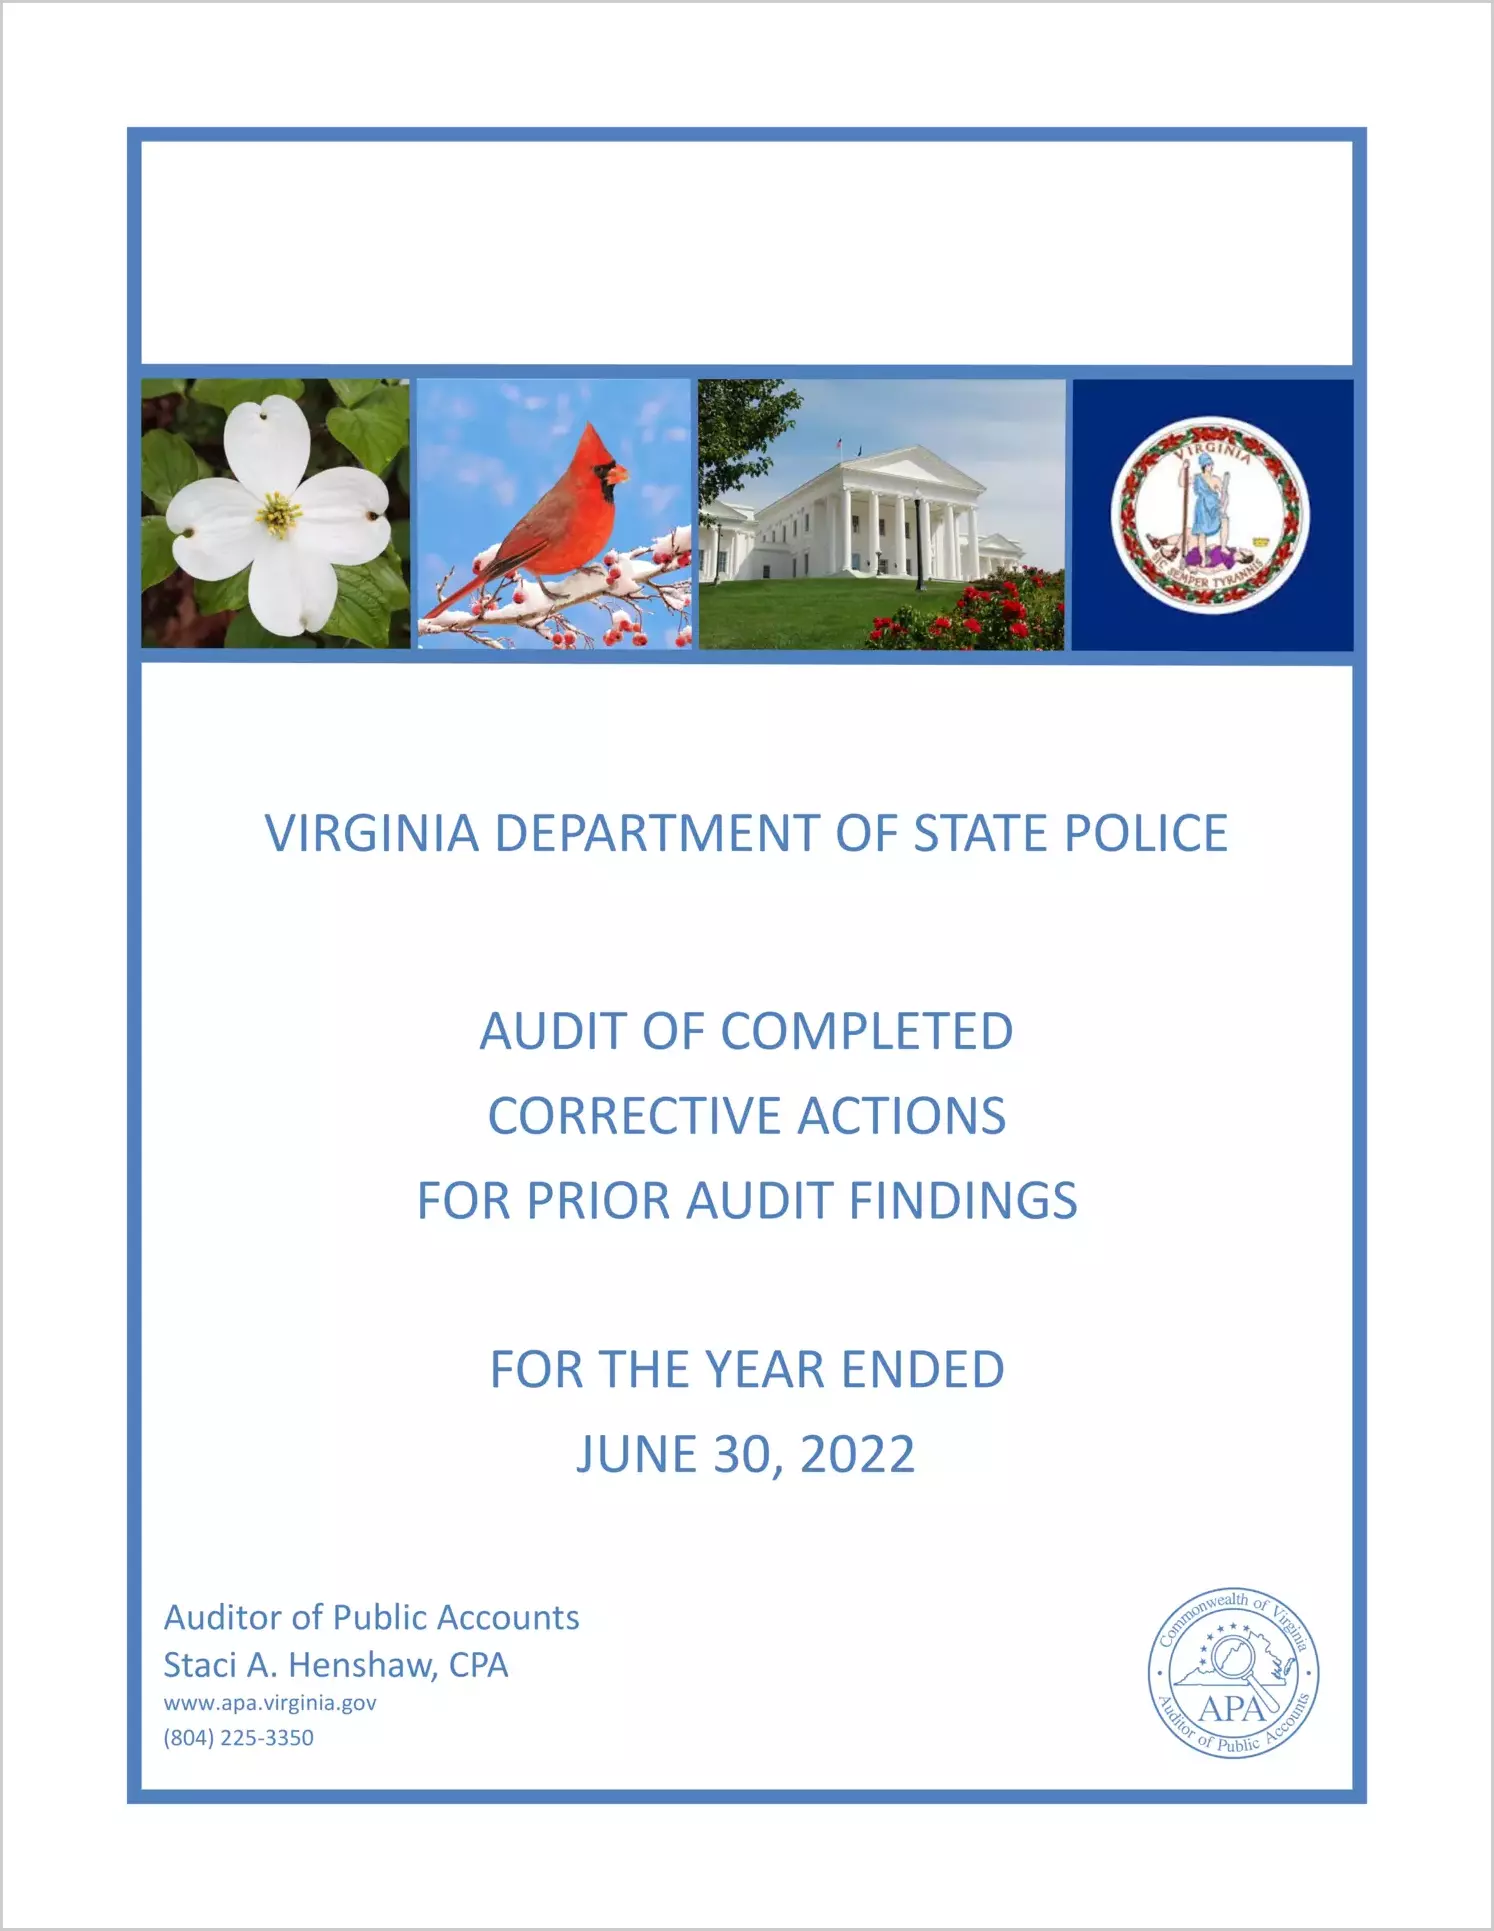 Virginia Department of State Police Completed Corrective Actions for Prior Audit Findings for the year ended June 30, 2022